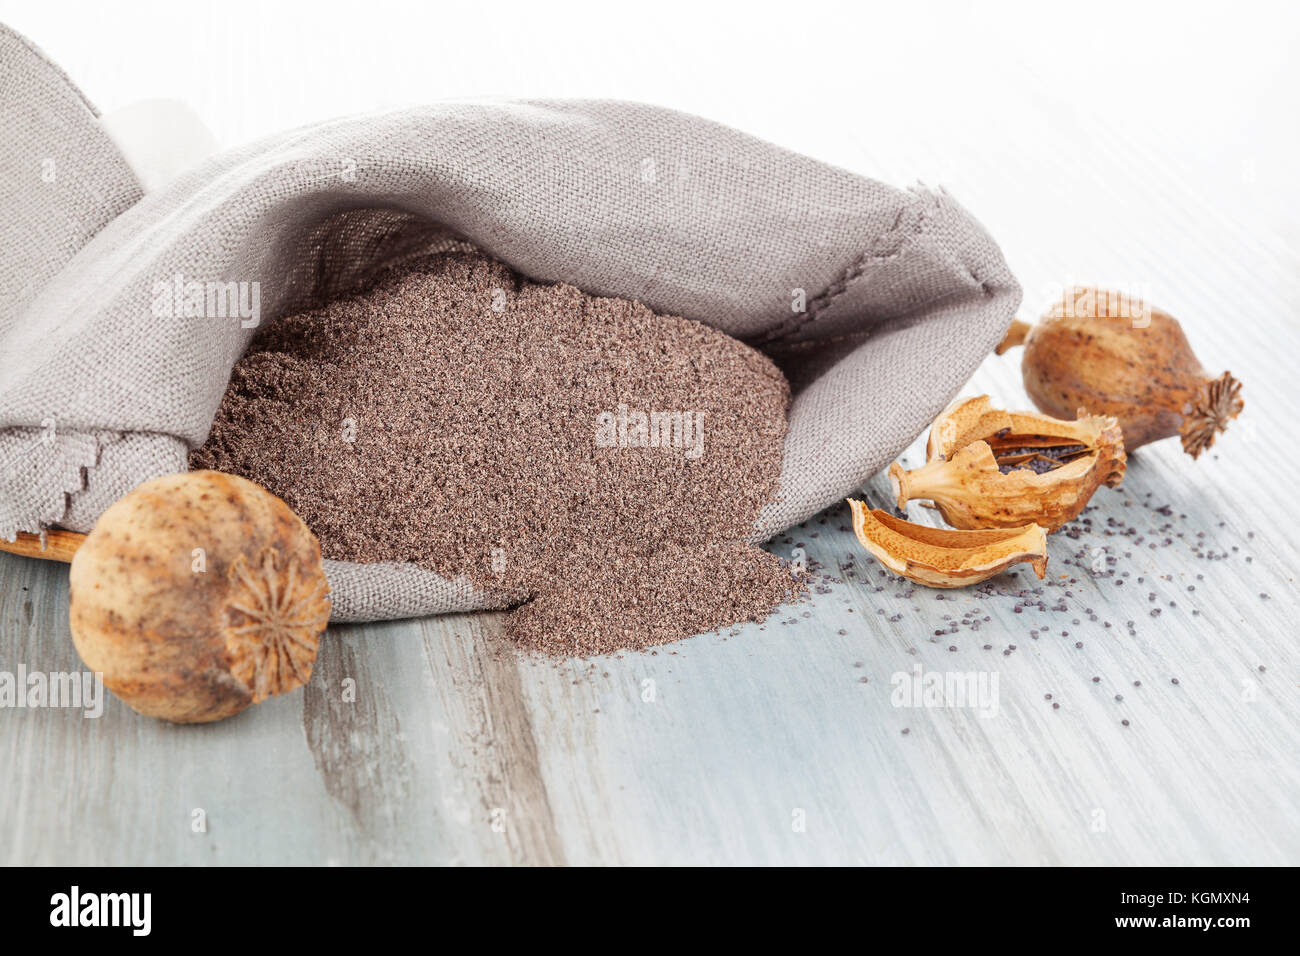 Poppy seeds with poppy flour in burlap bag on wooden table. Coeliac disease concept. Stock Photo